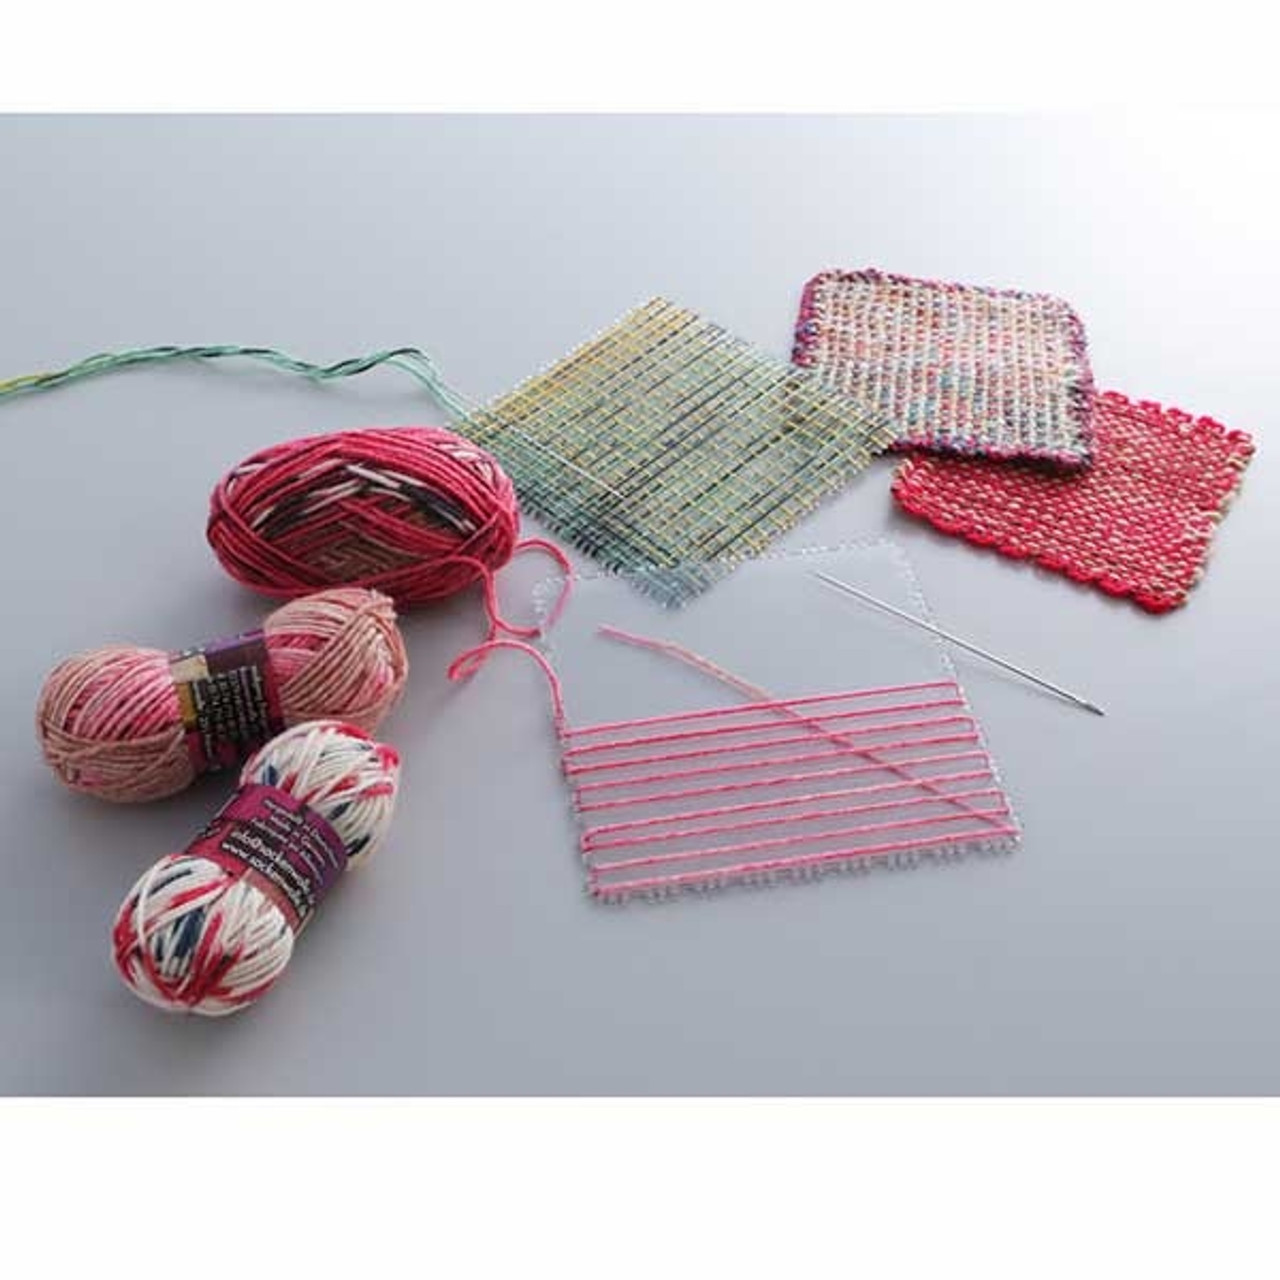 Sock Loom 2 with Project Book